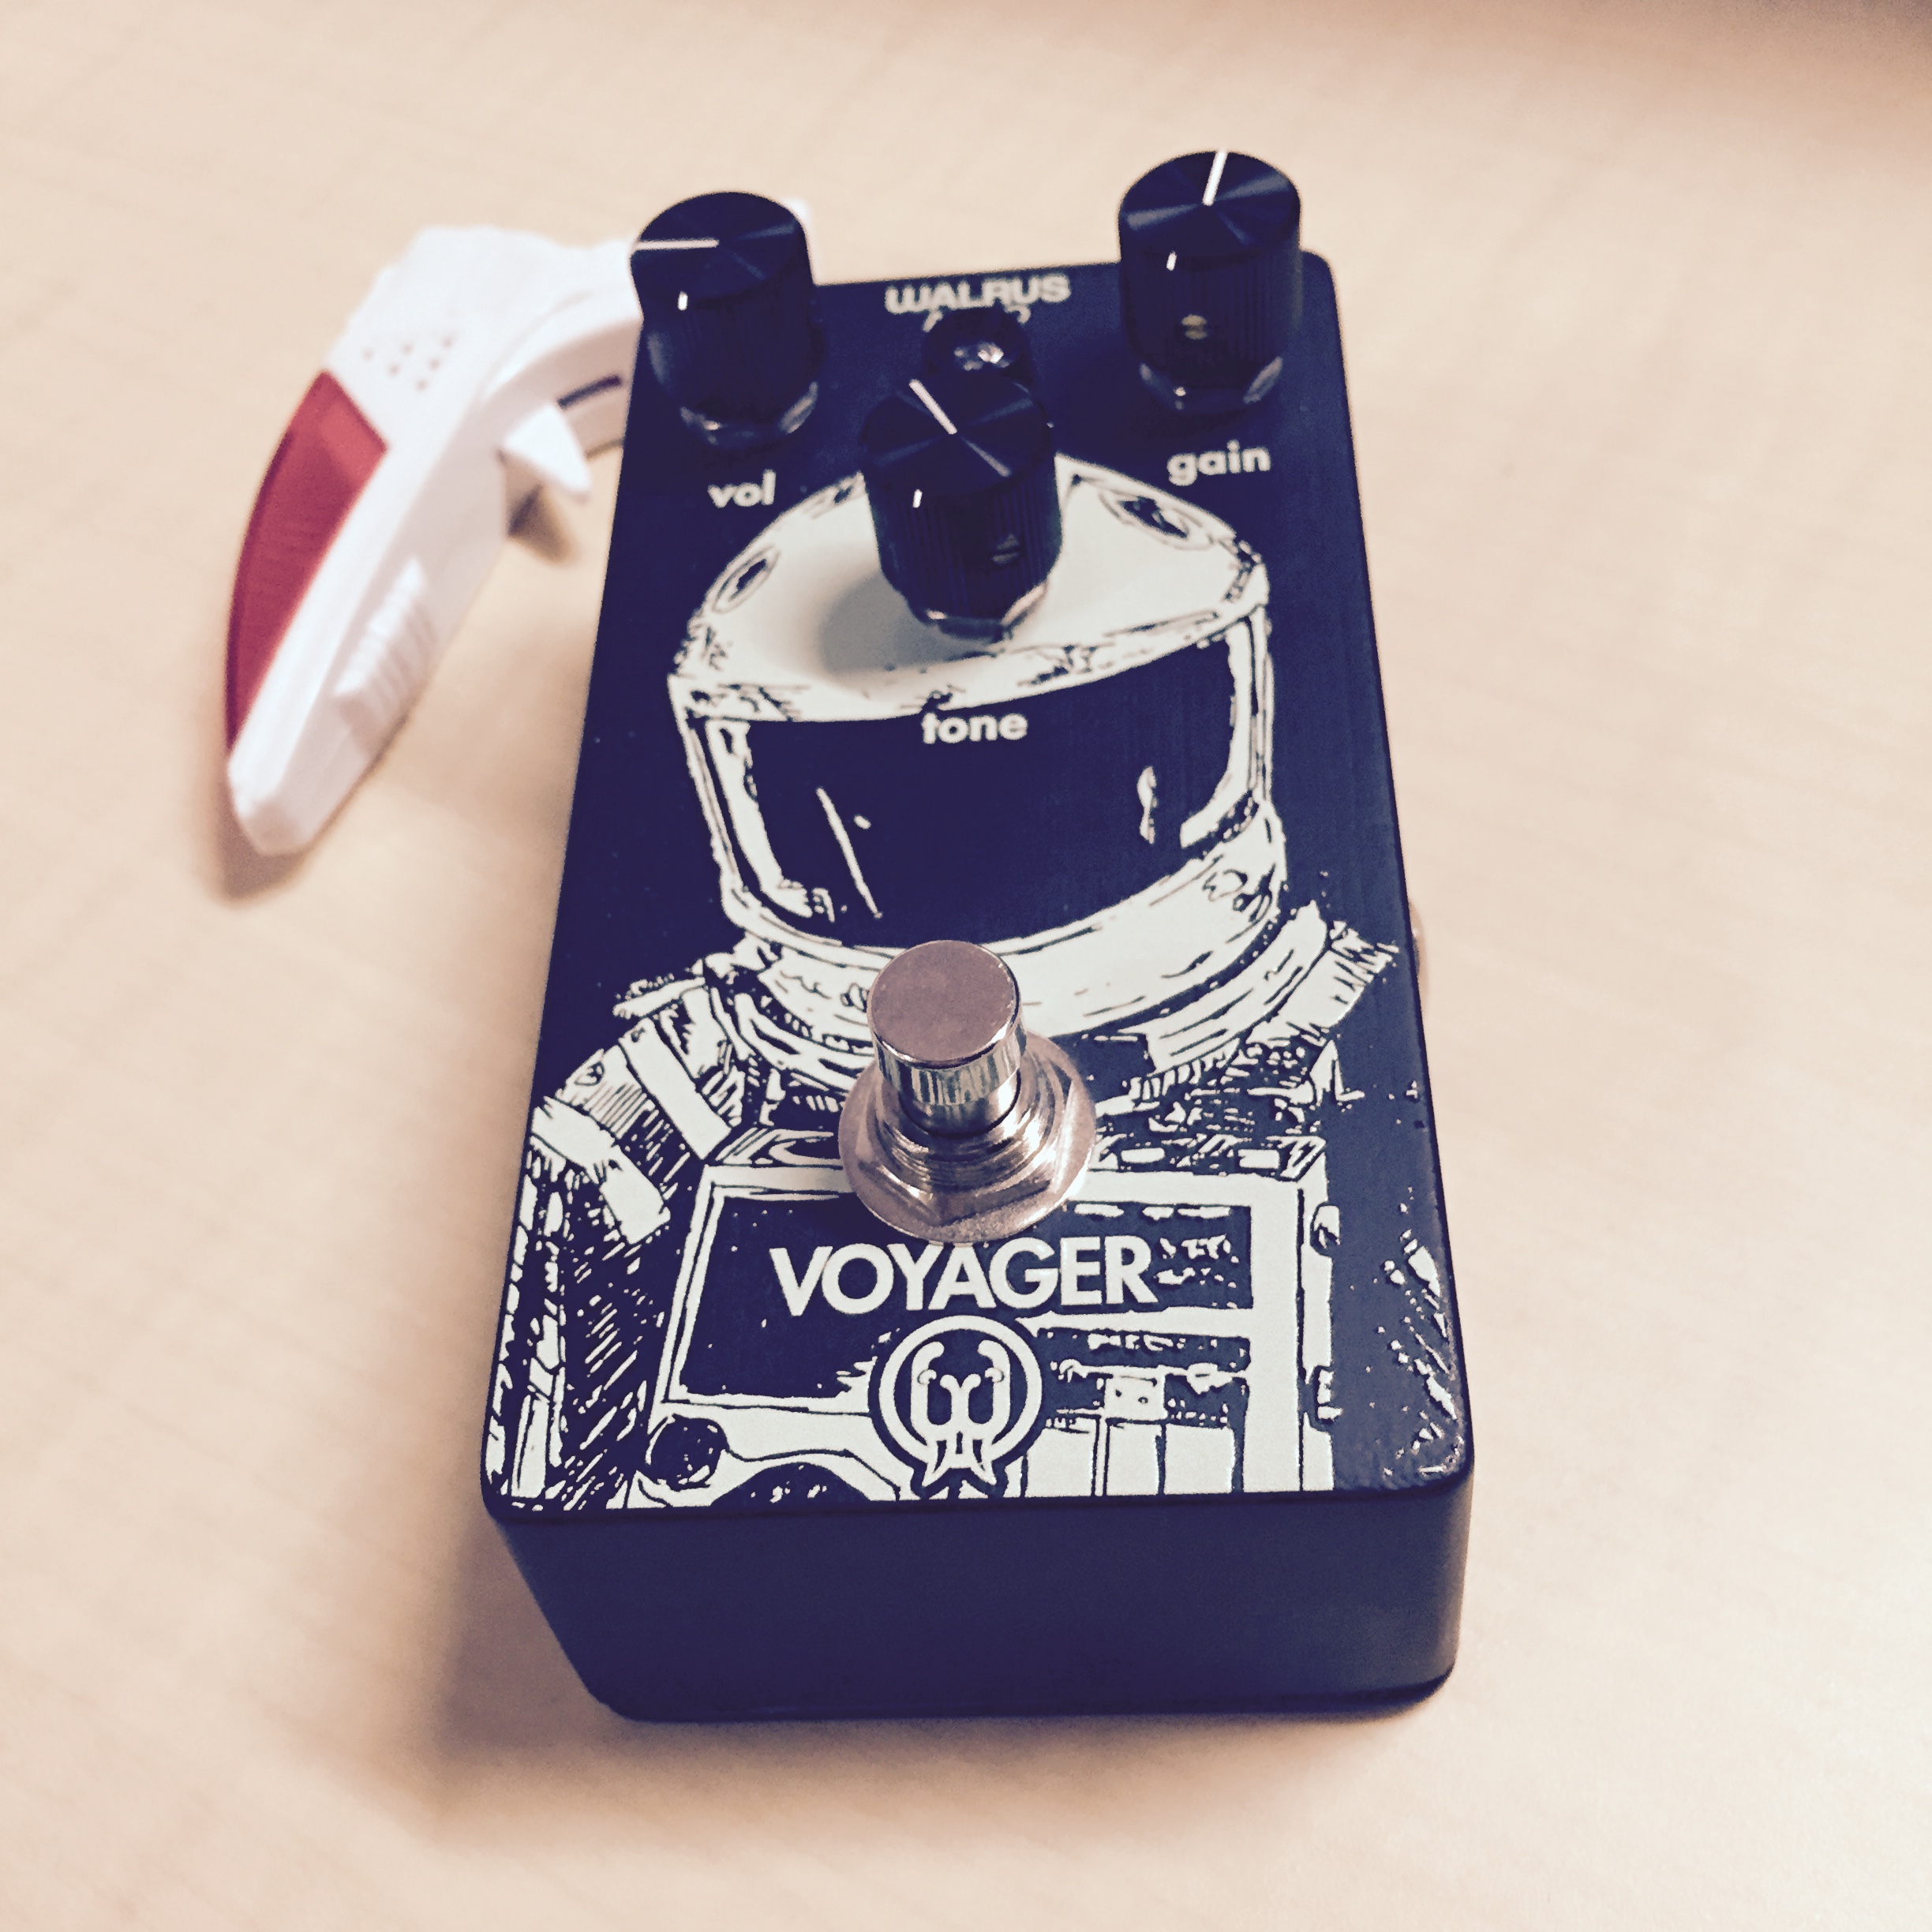 New Pedal! Walrus Audio Voyager